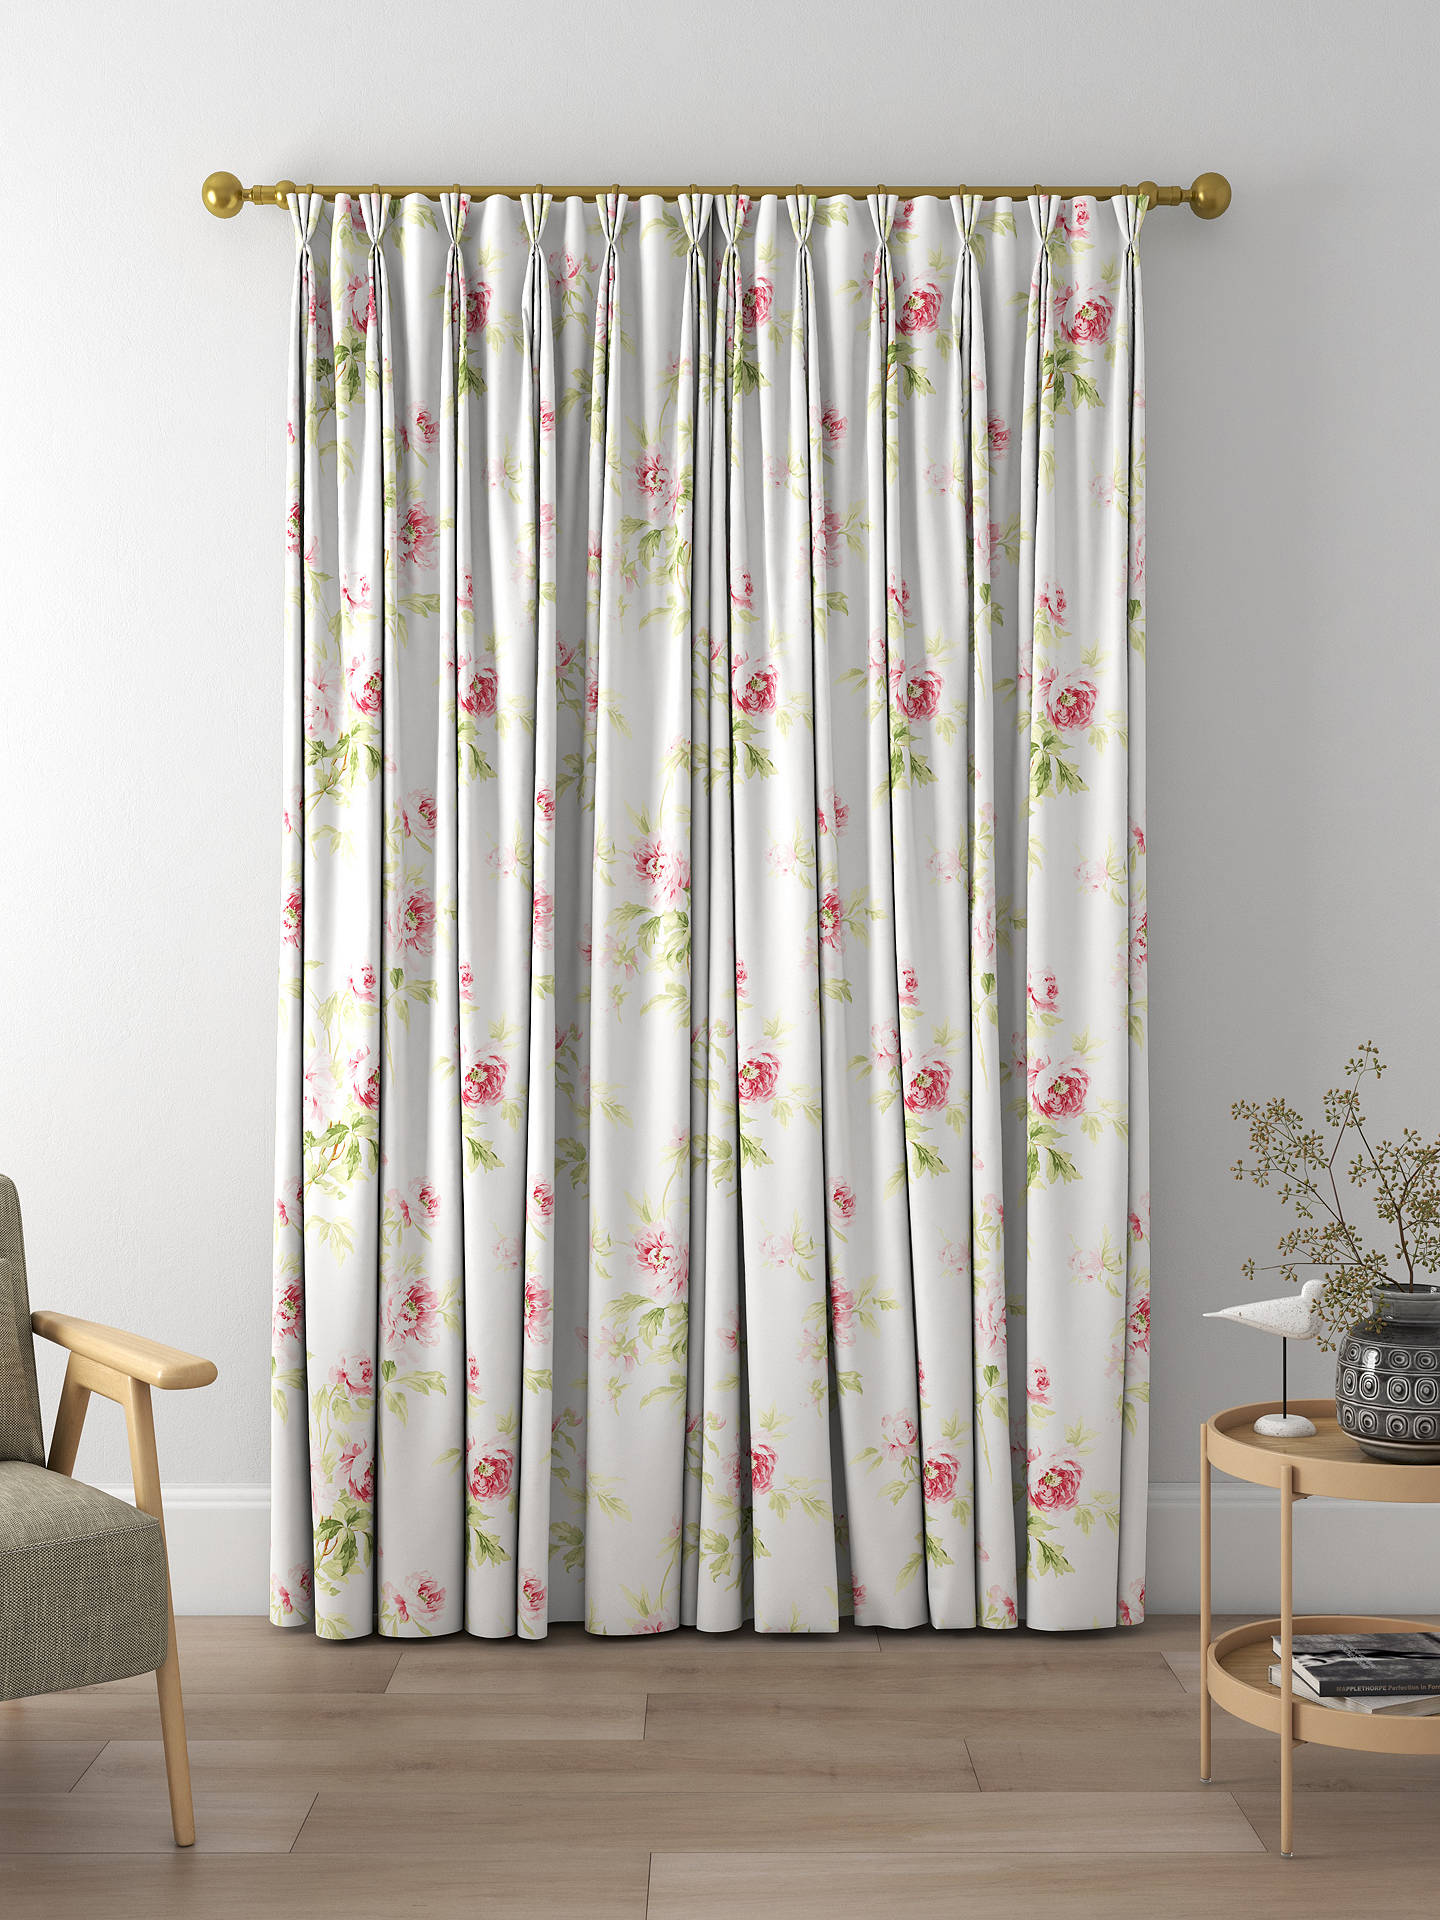 Sanderson Adele Made to Measure Curtains, Rose/Cream